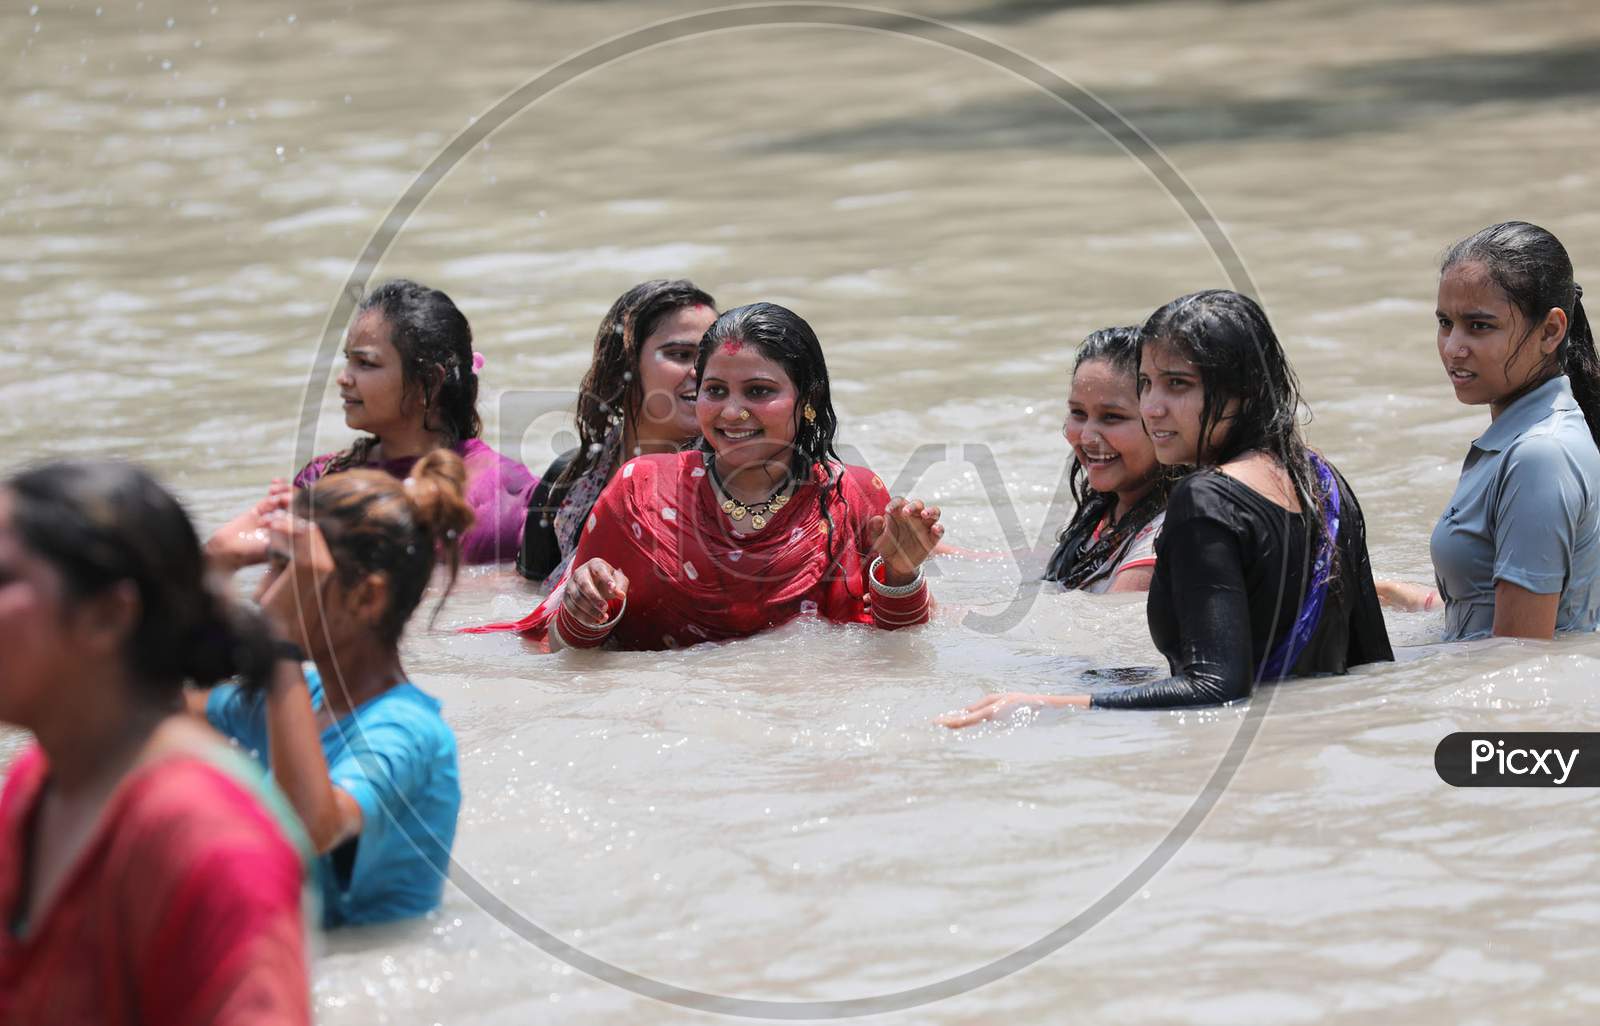 Ladies enjoying a cool dip in waters of Ranbir Canal to beat the summer heat in Jammu on July 2, 2020